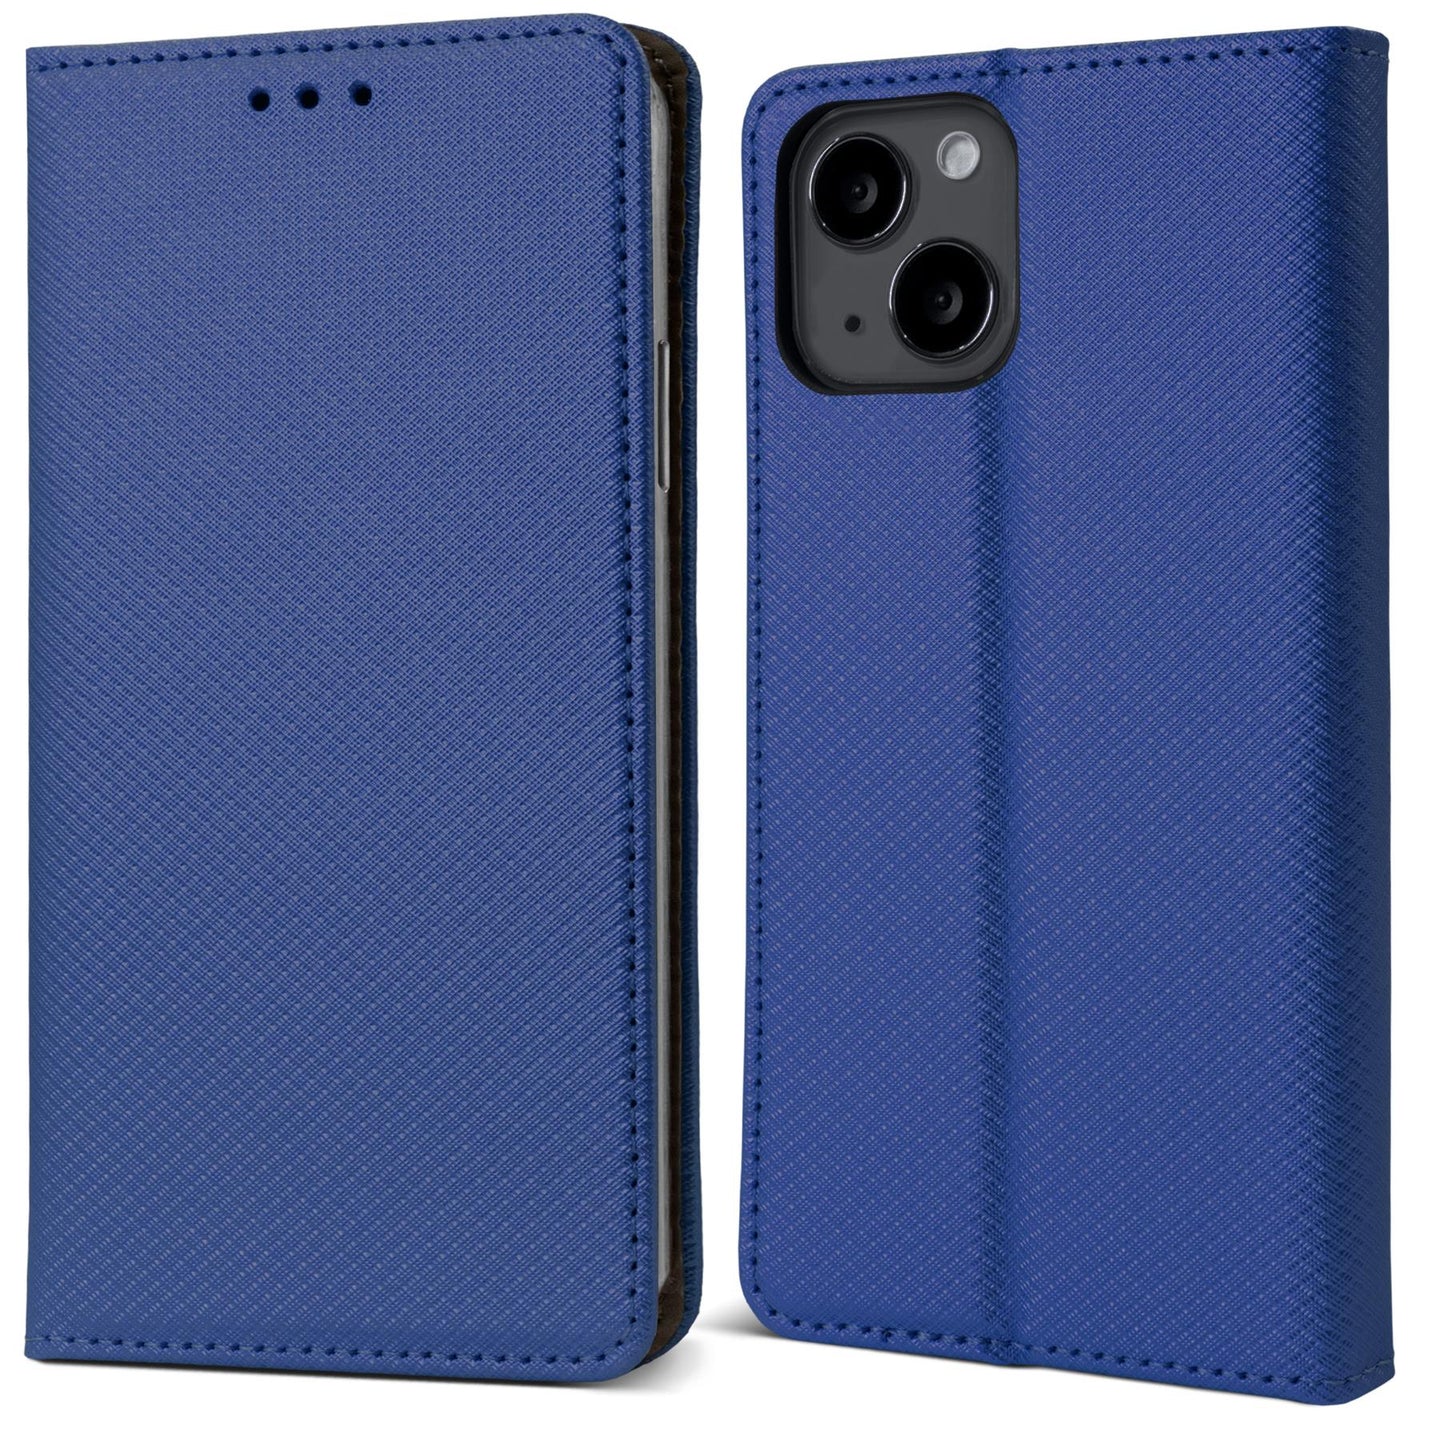 Moozy Case Flip Cover for iPhone 14, Dark Blue - Smart Magnetic Flip Case Flip Folio Wallet Case with Card Holder and Stand, Credit Card Slots, Kickstand Function